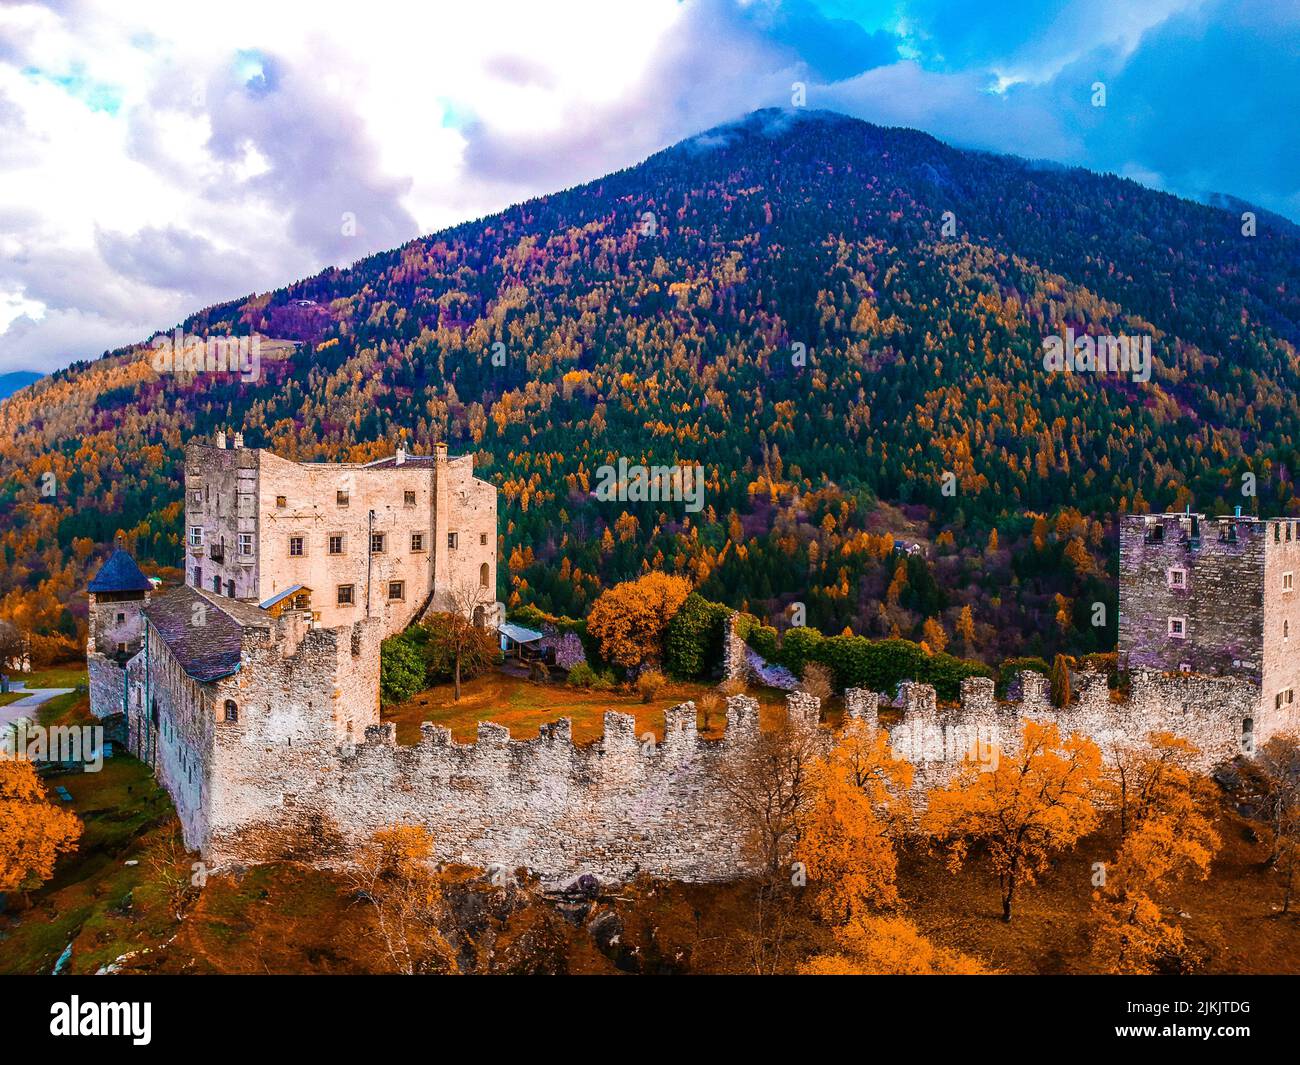 A beautiful view of the castle on the forested mountain Stock Photo